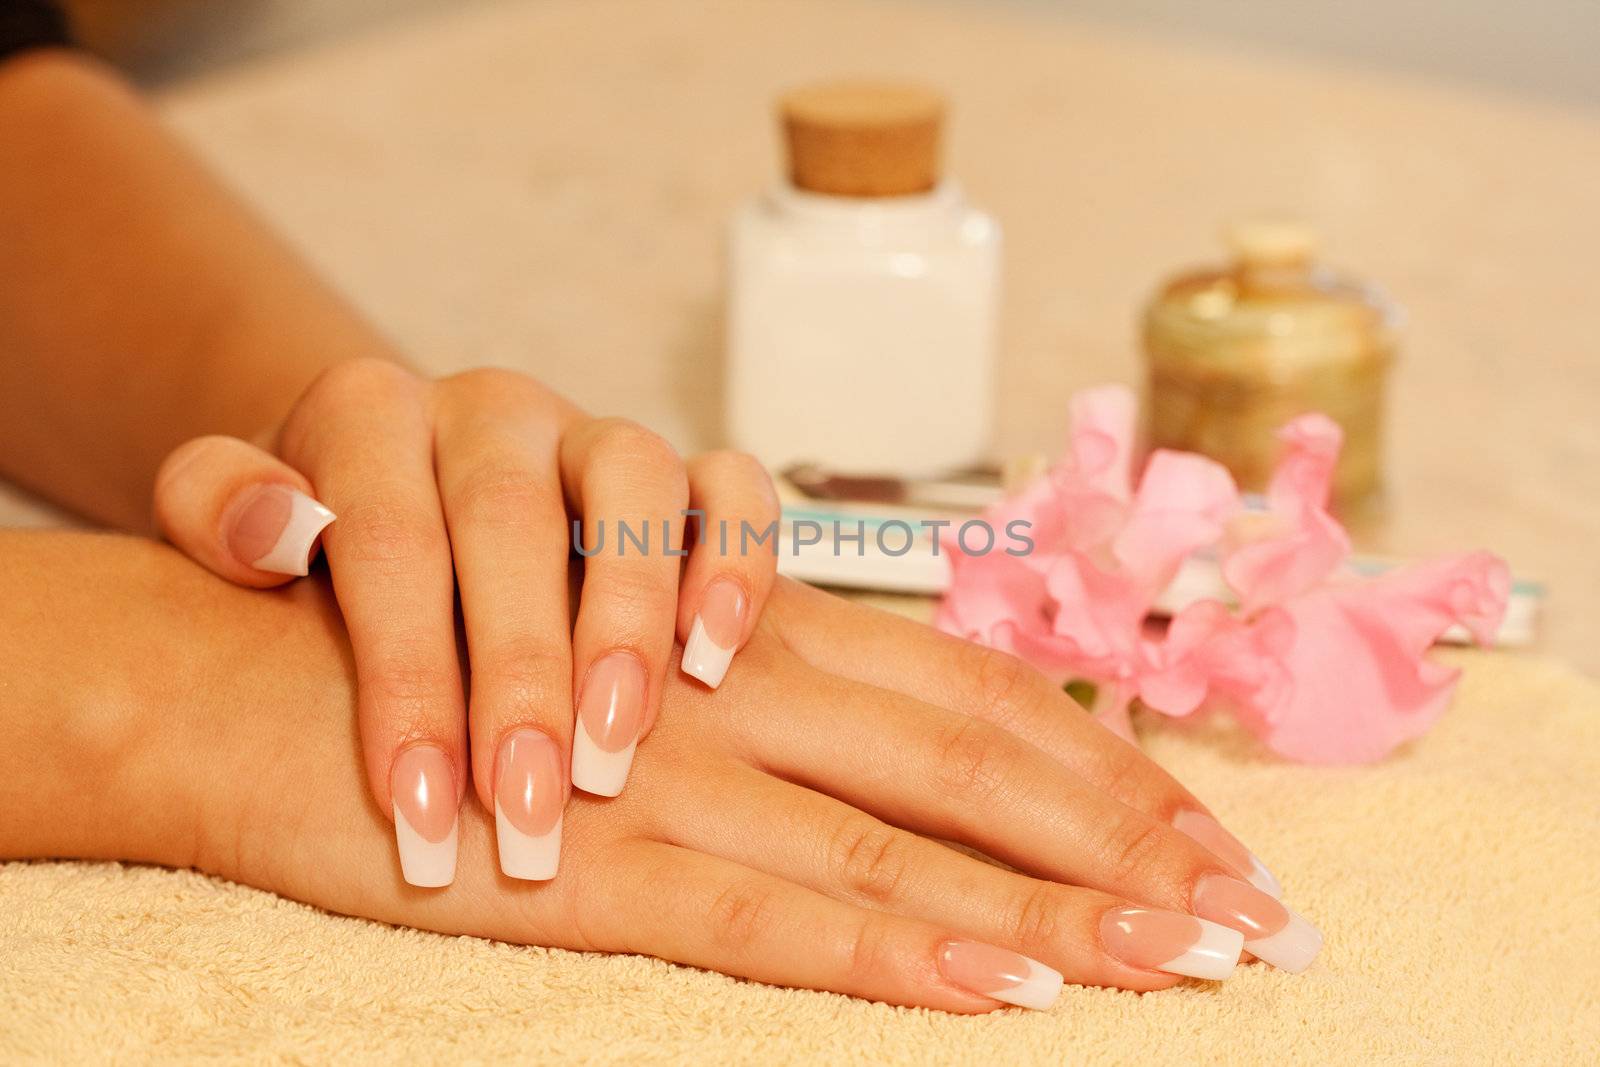 Hands of young woman with french manicure by mihhailov